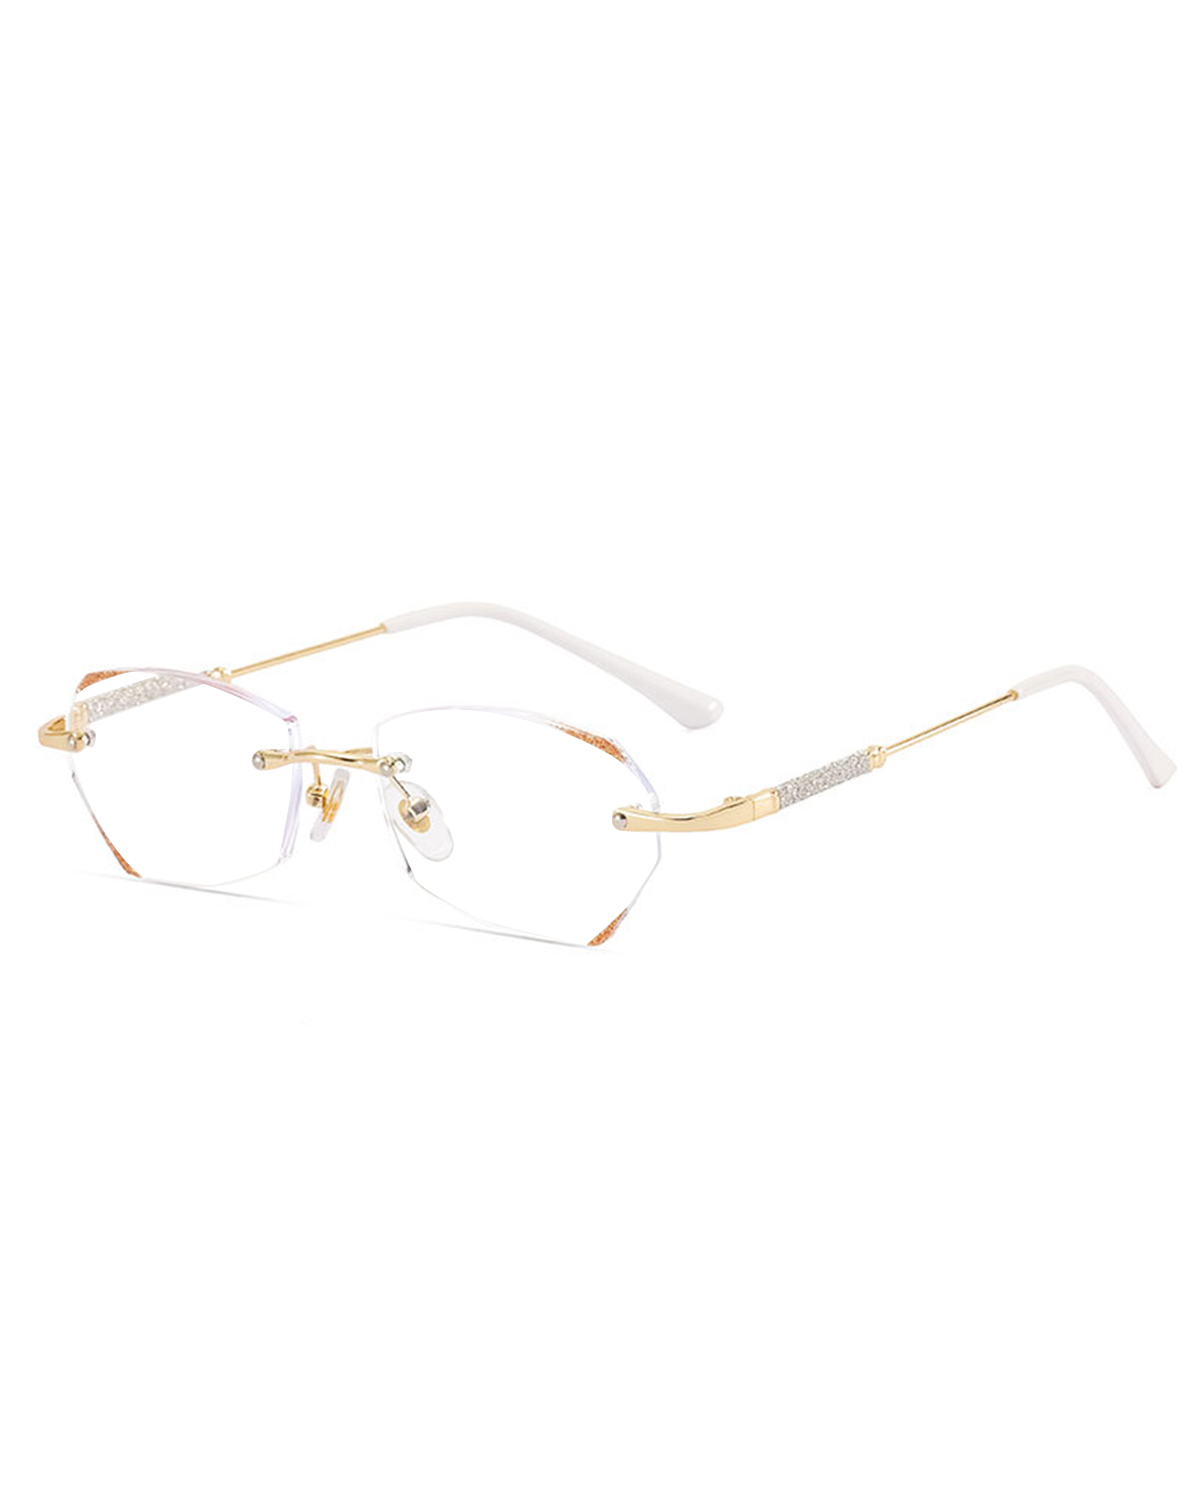 LUFF Rimless Reading Glasses for Women,Fashion Lightweight Anti Blue Light Readers Classic Metal Comfortable Frame glasses